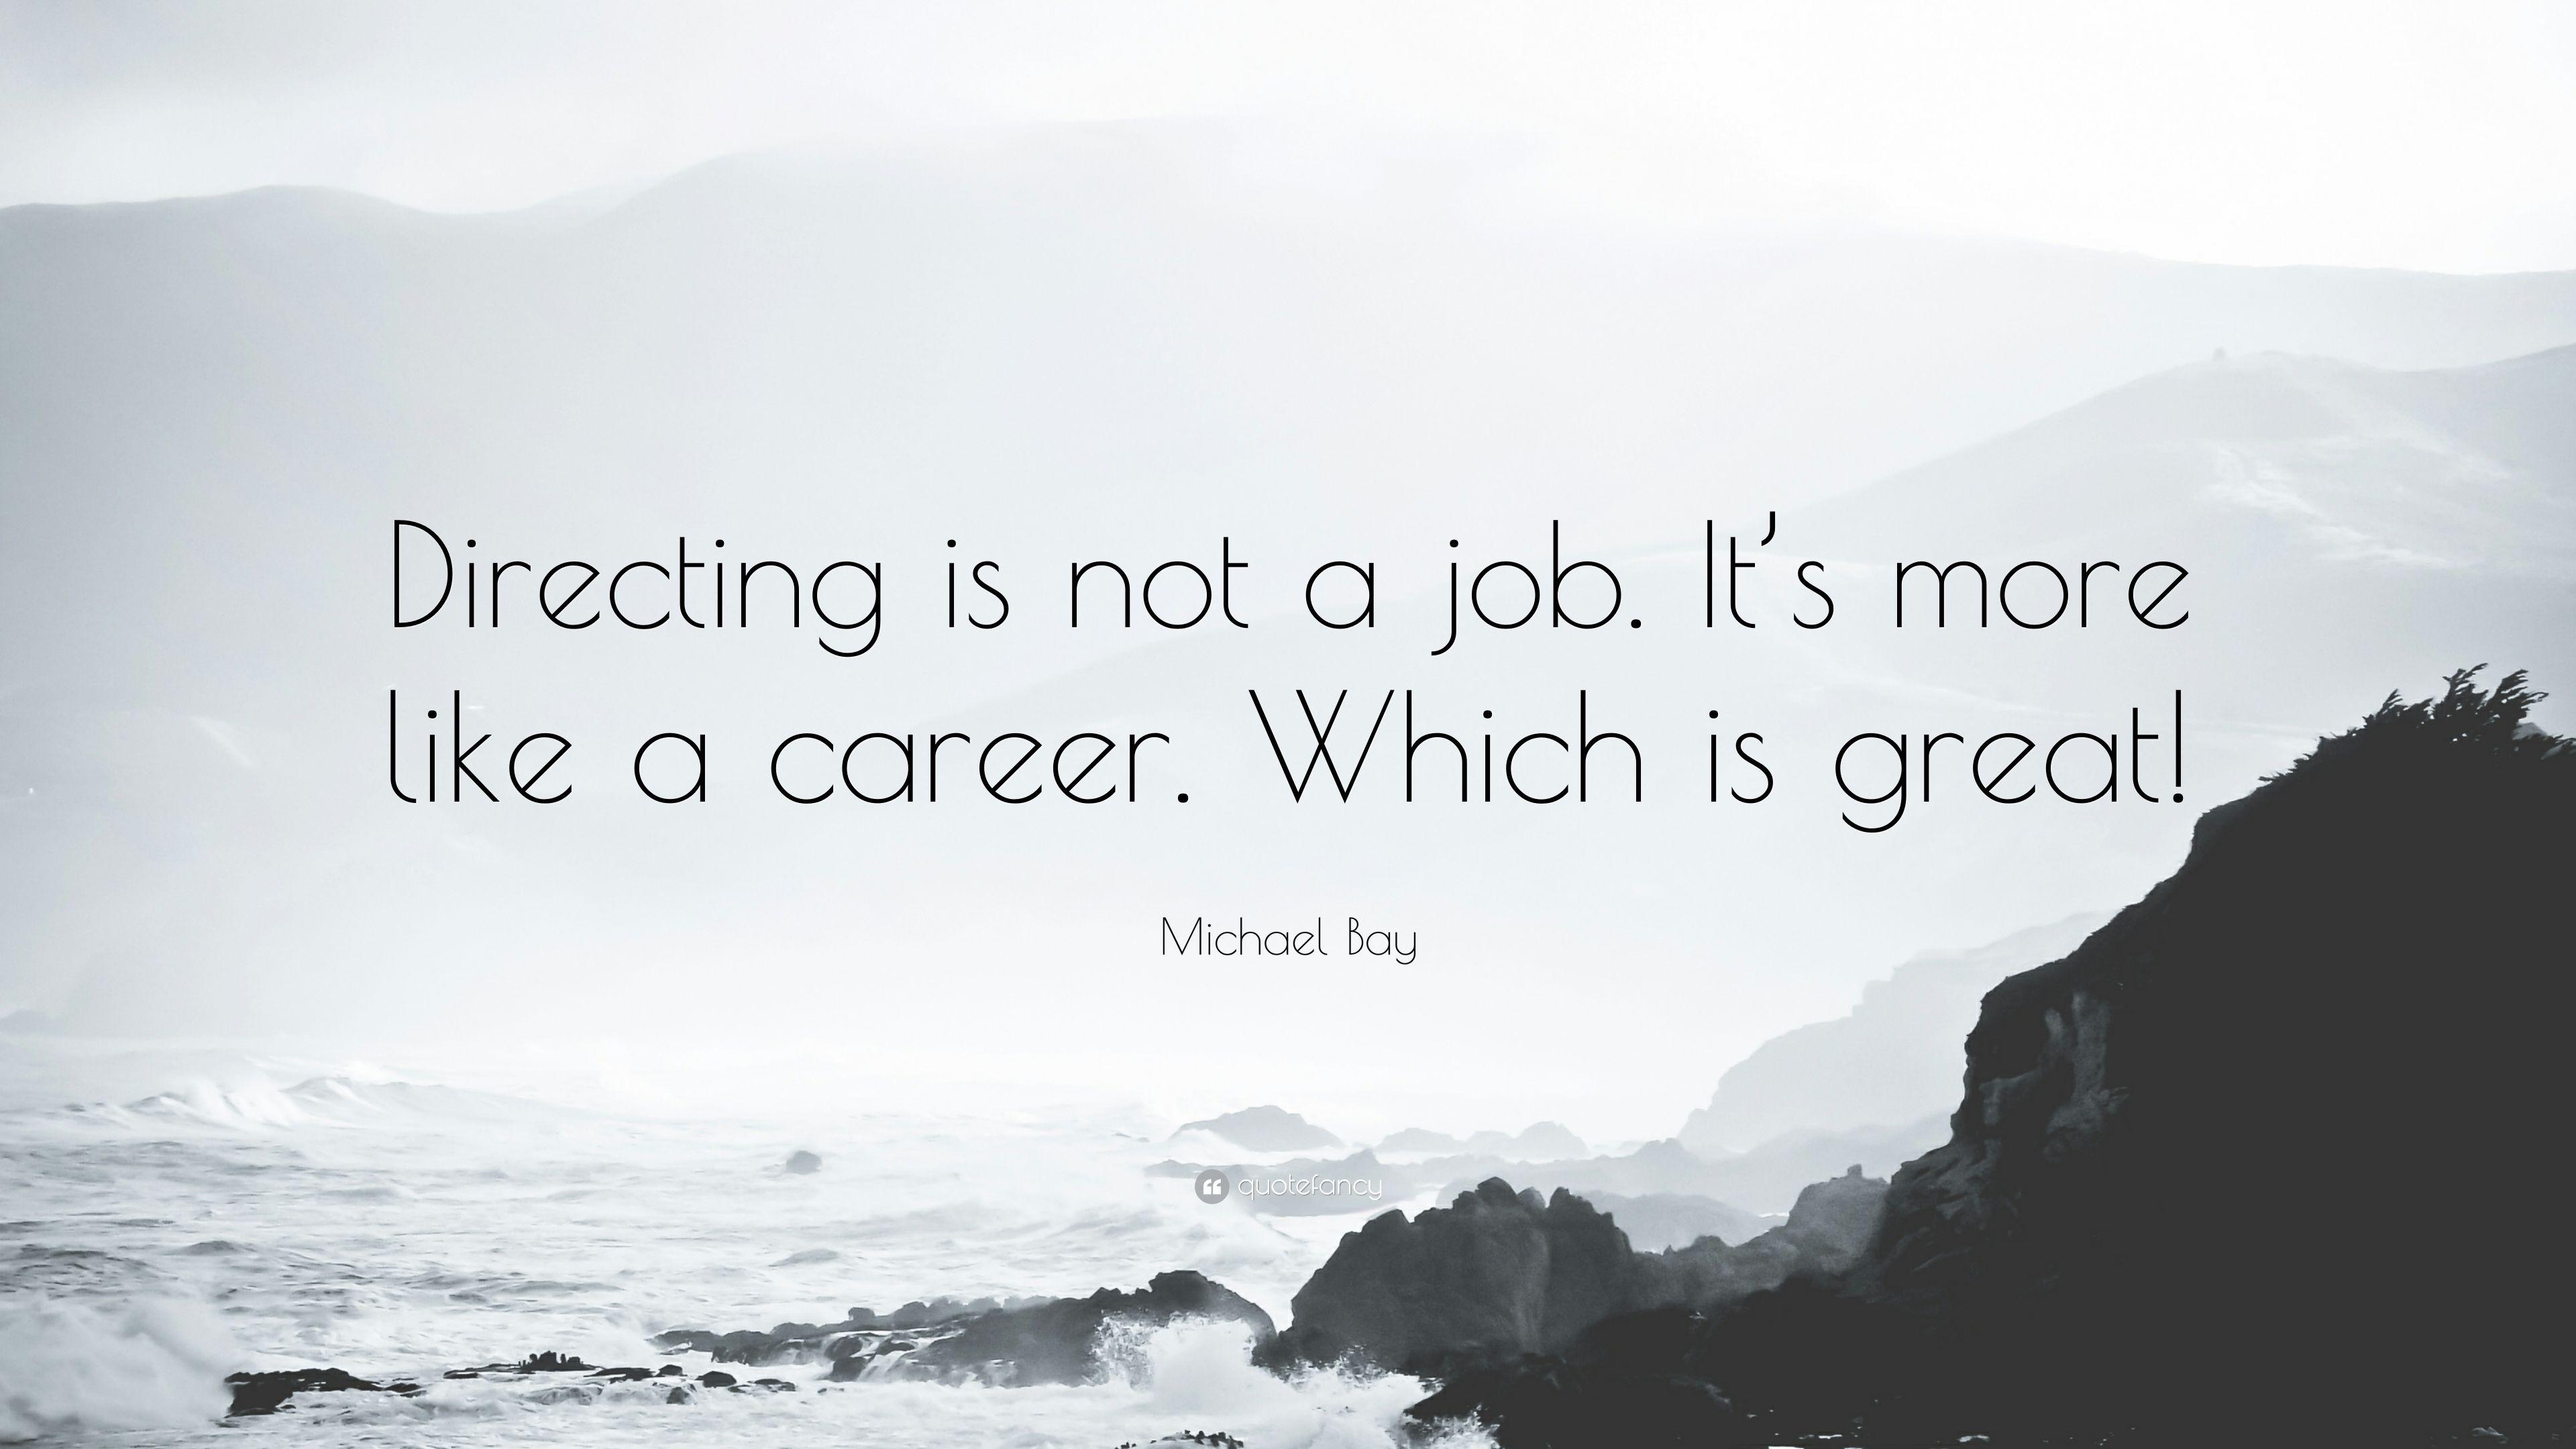 Michael Bay Quote: “Directing is not a job. It's more like a career